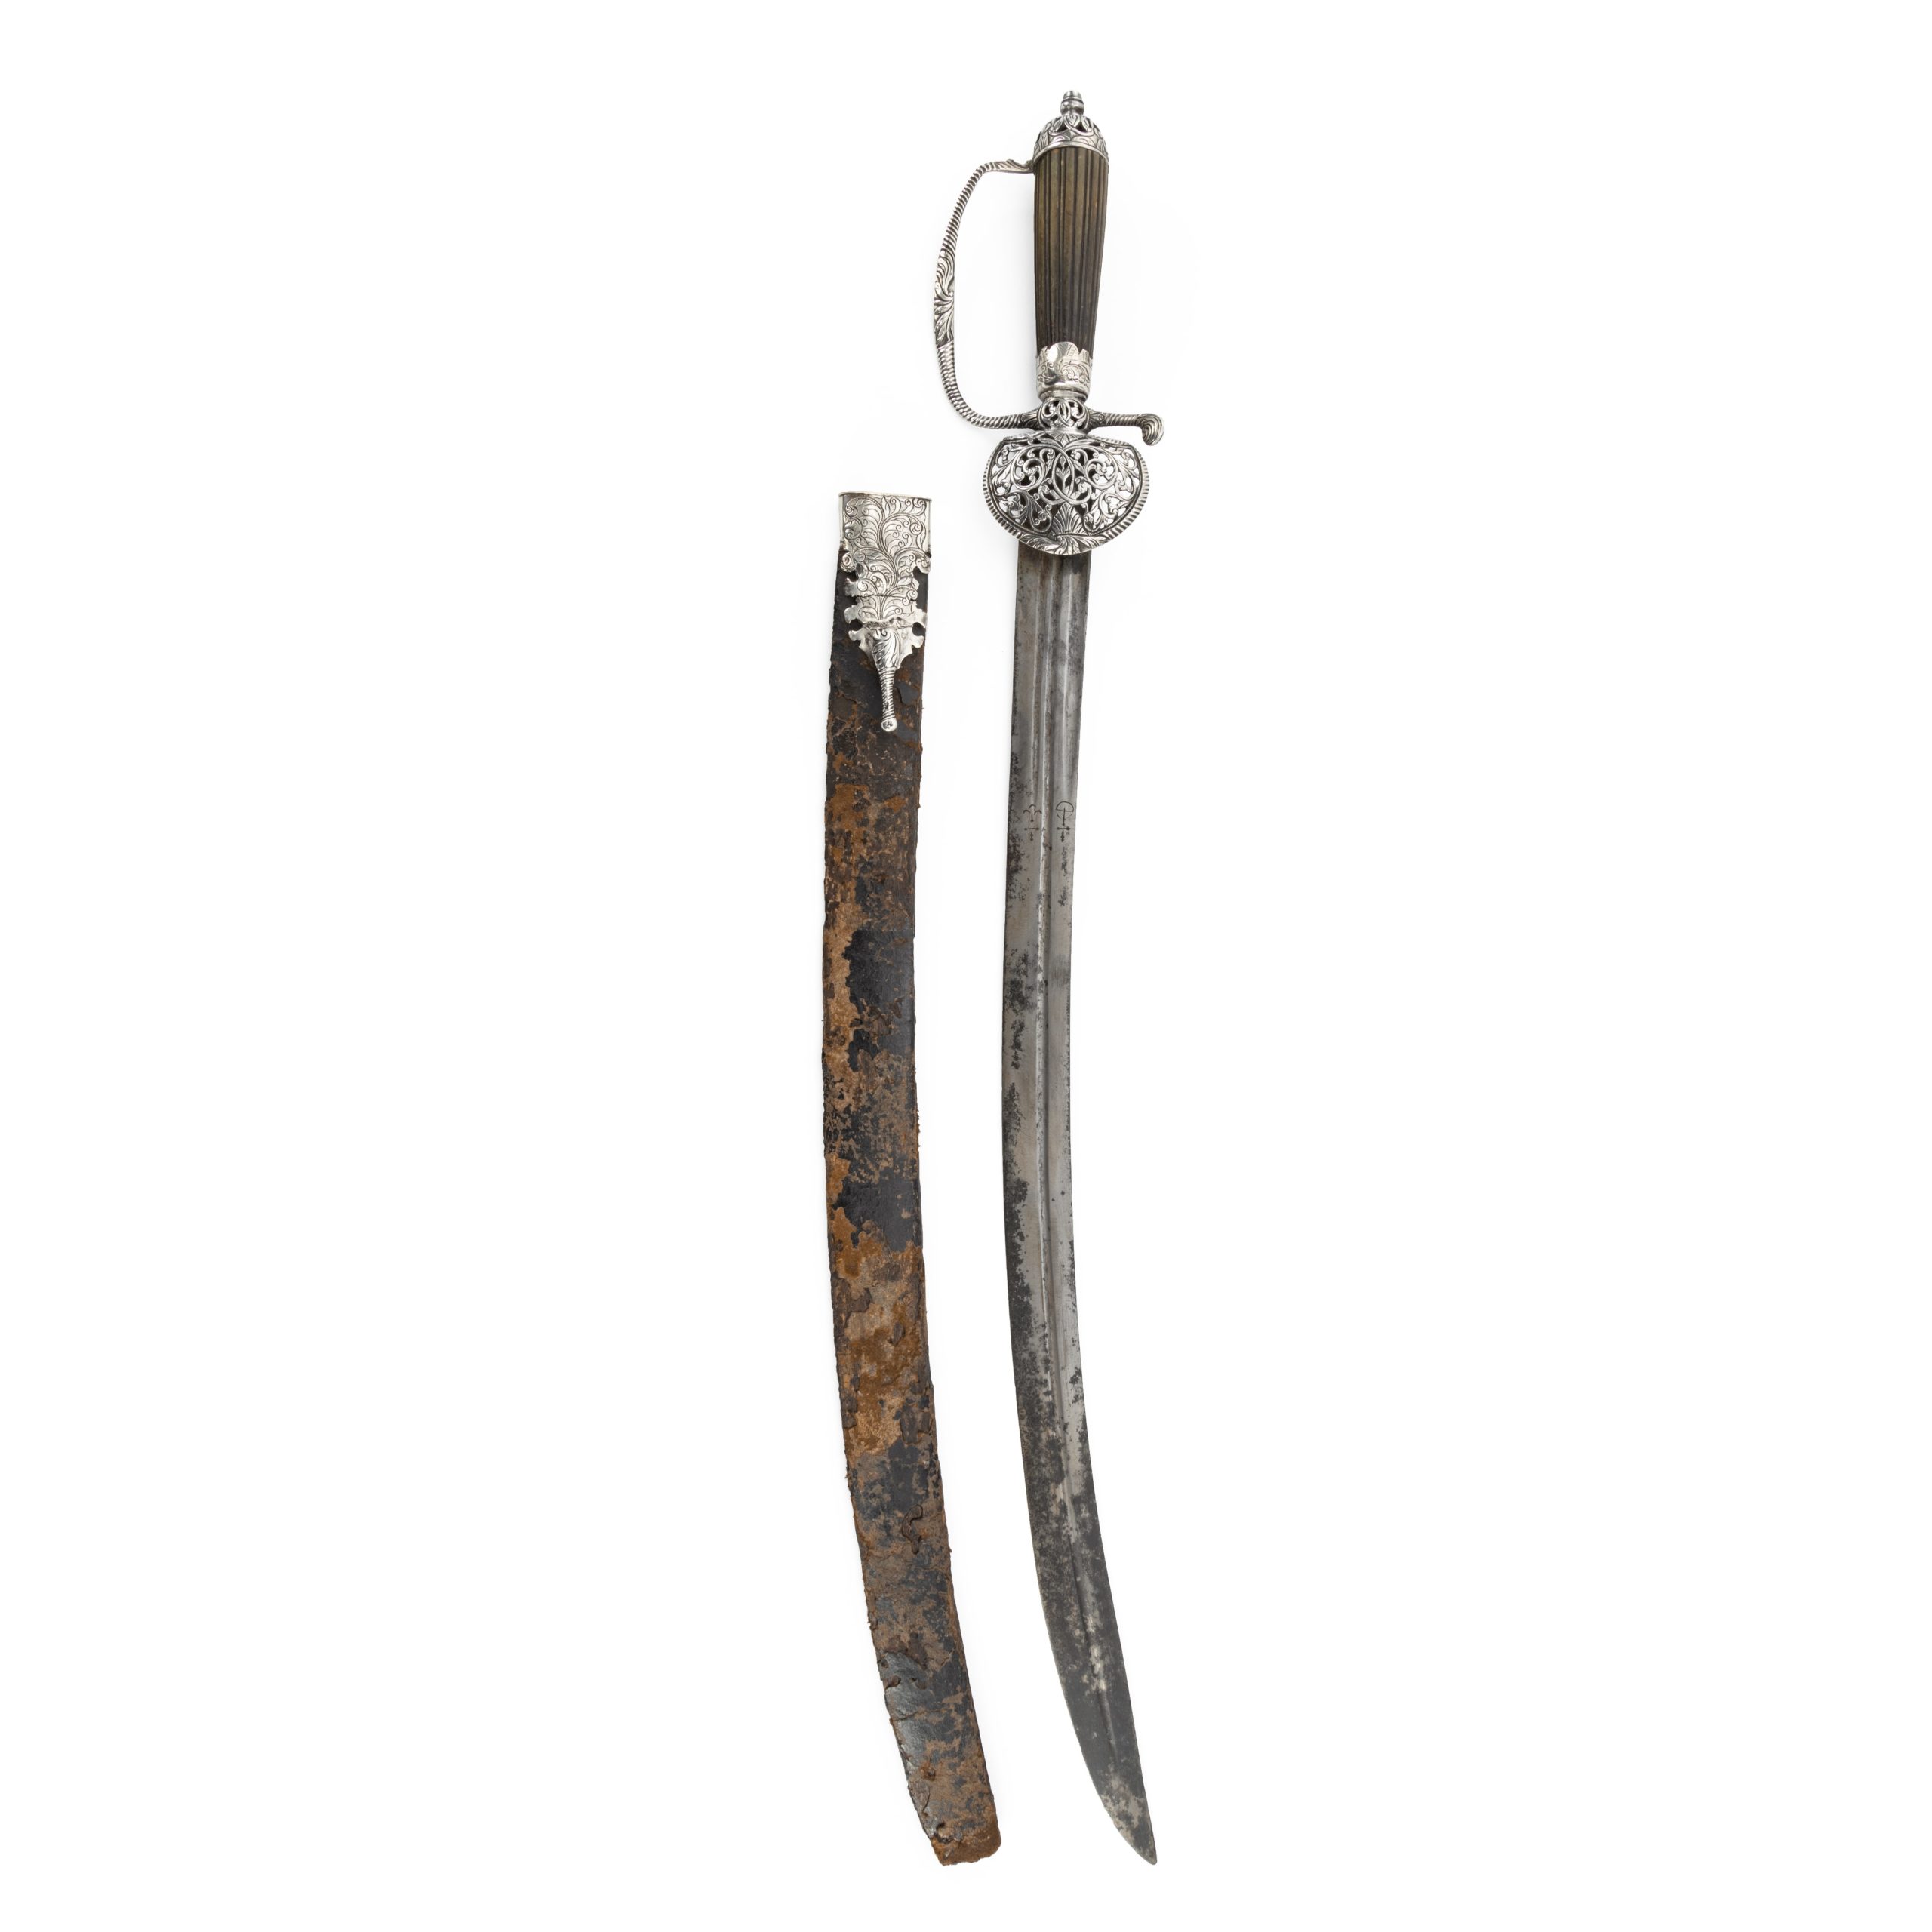 Admiral Lord Nelson’s silver hanger sword